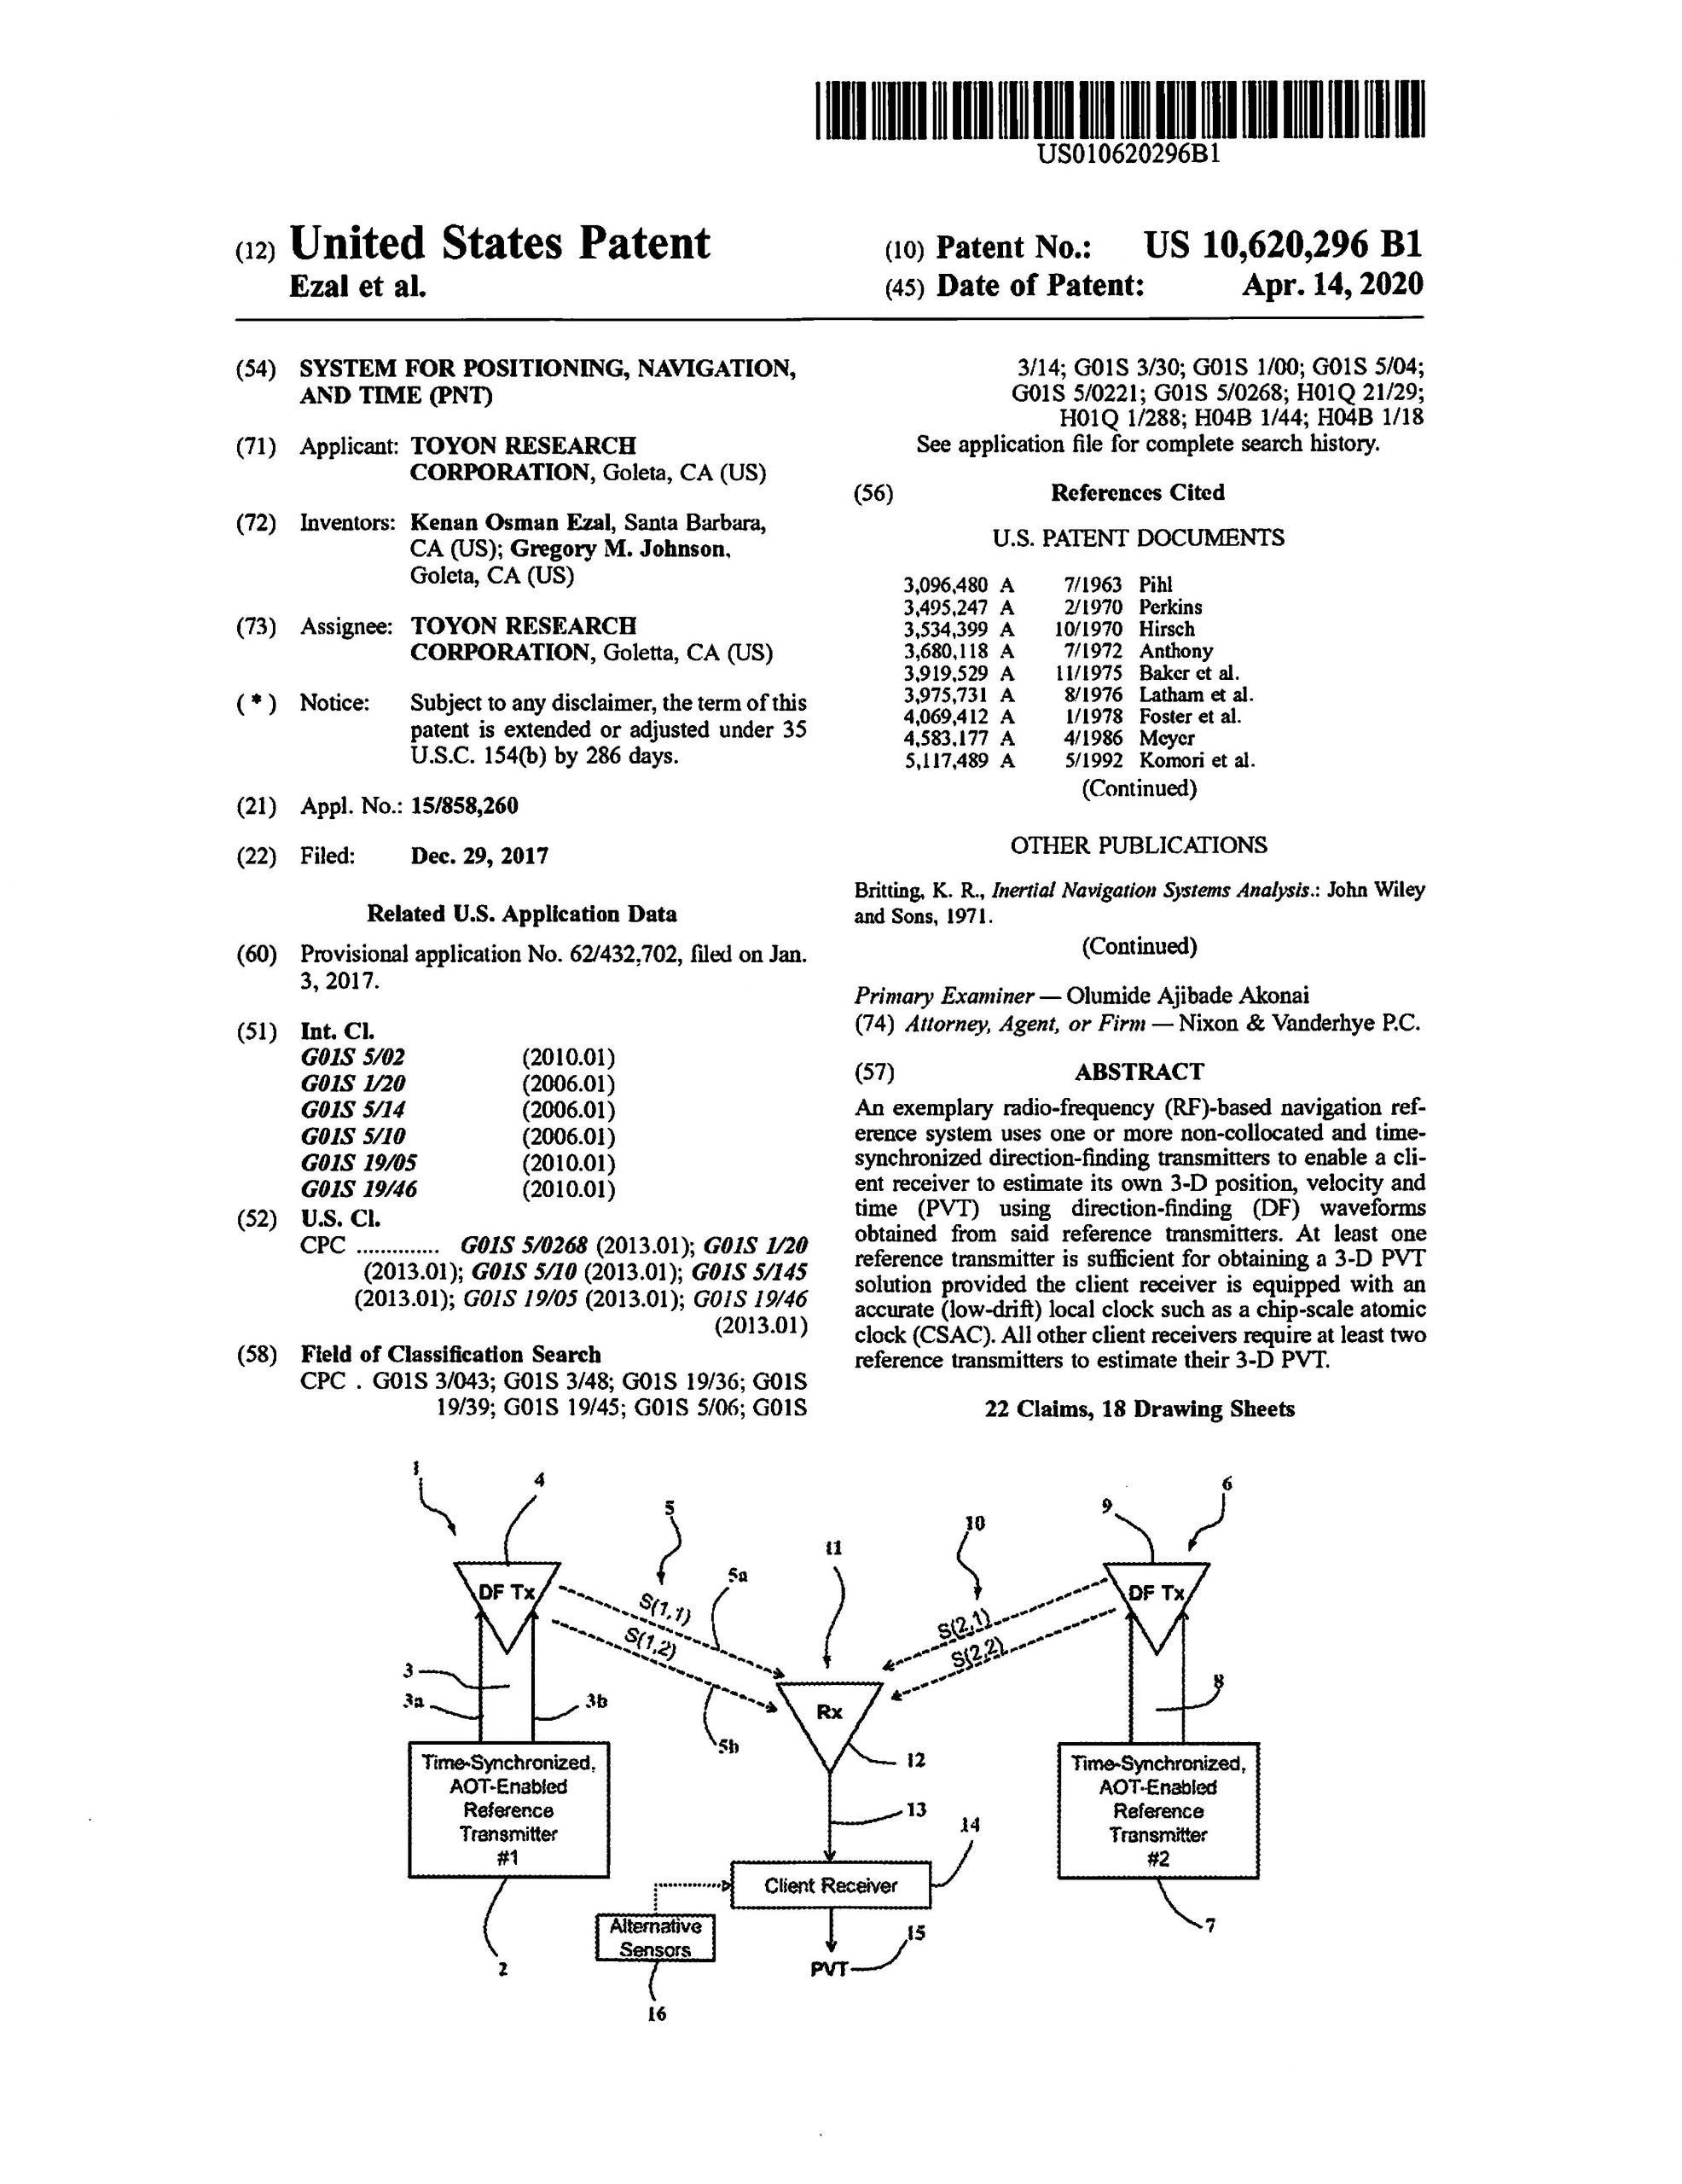 US Patent issued to Toyon entitled “System for Positioning, Navigation, and Time (PNT)"
